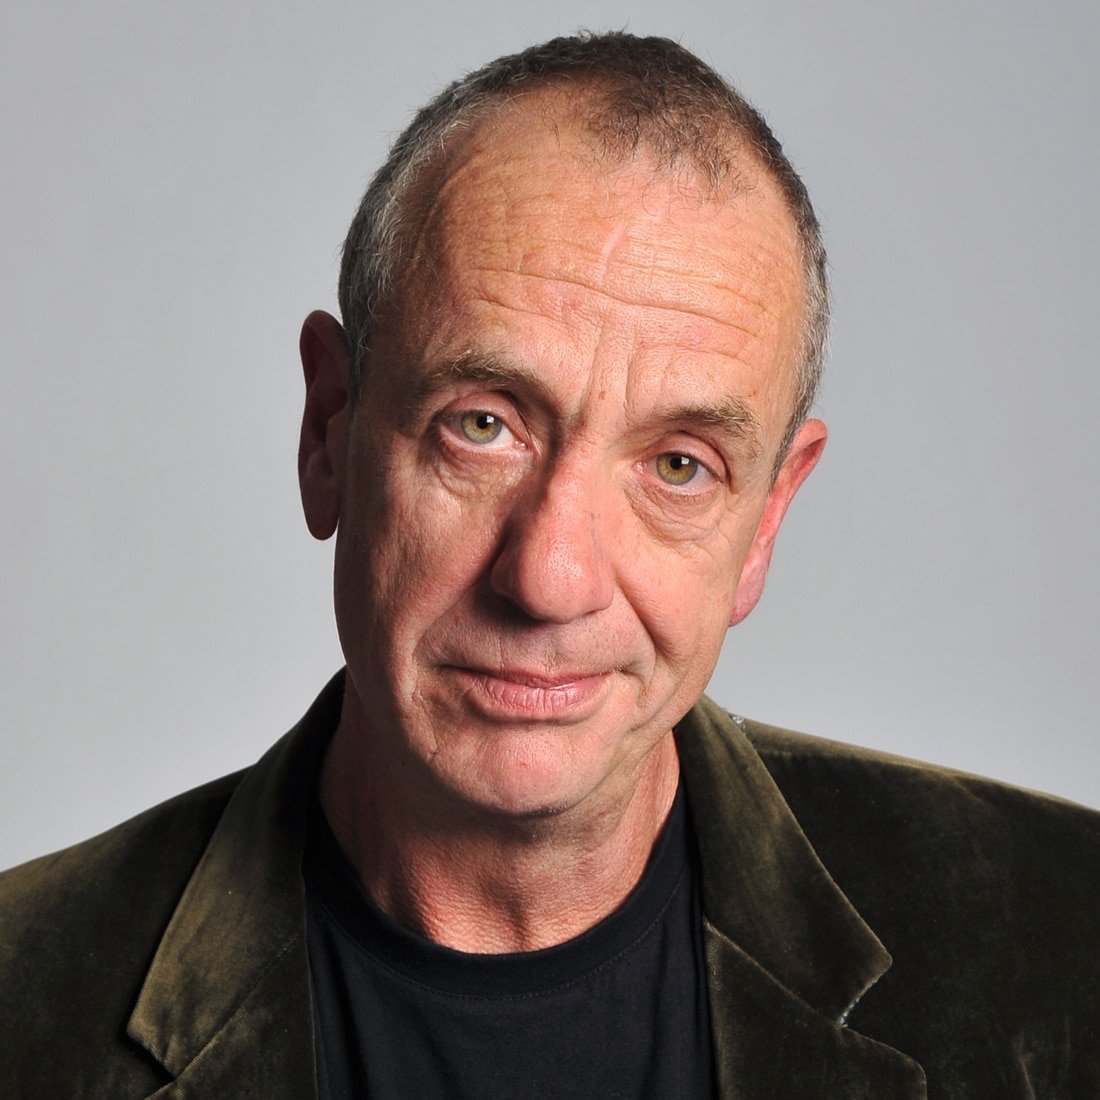 Arthur Smith Comedian corporate awards host TV presenter at Great British Speakers